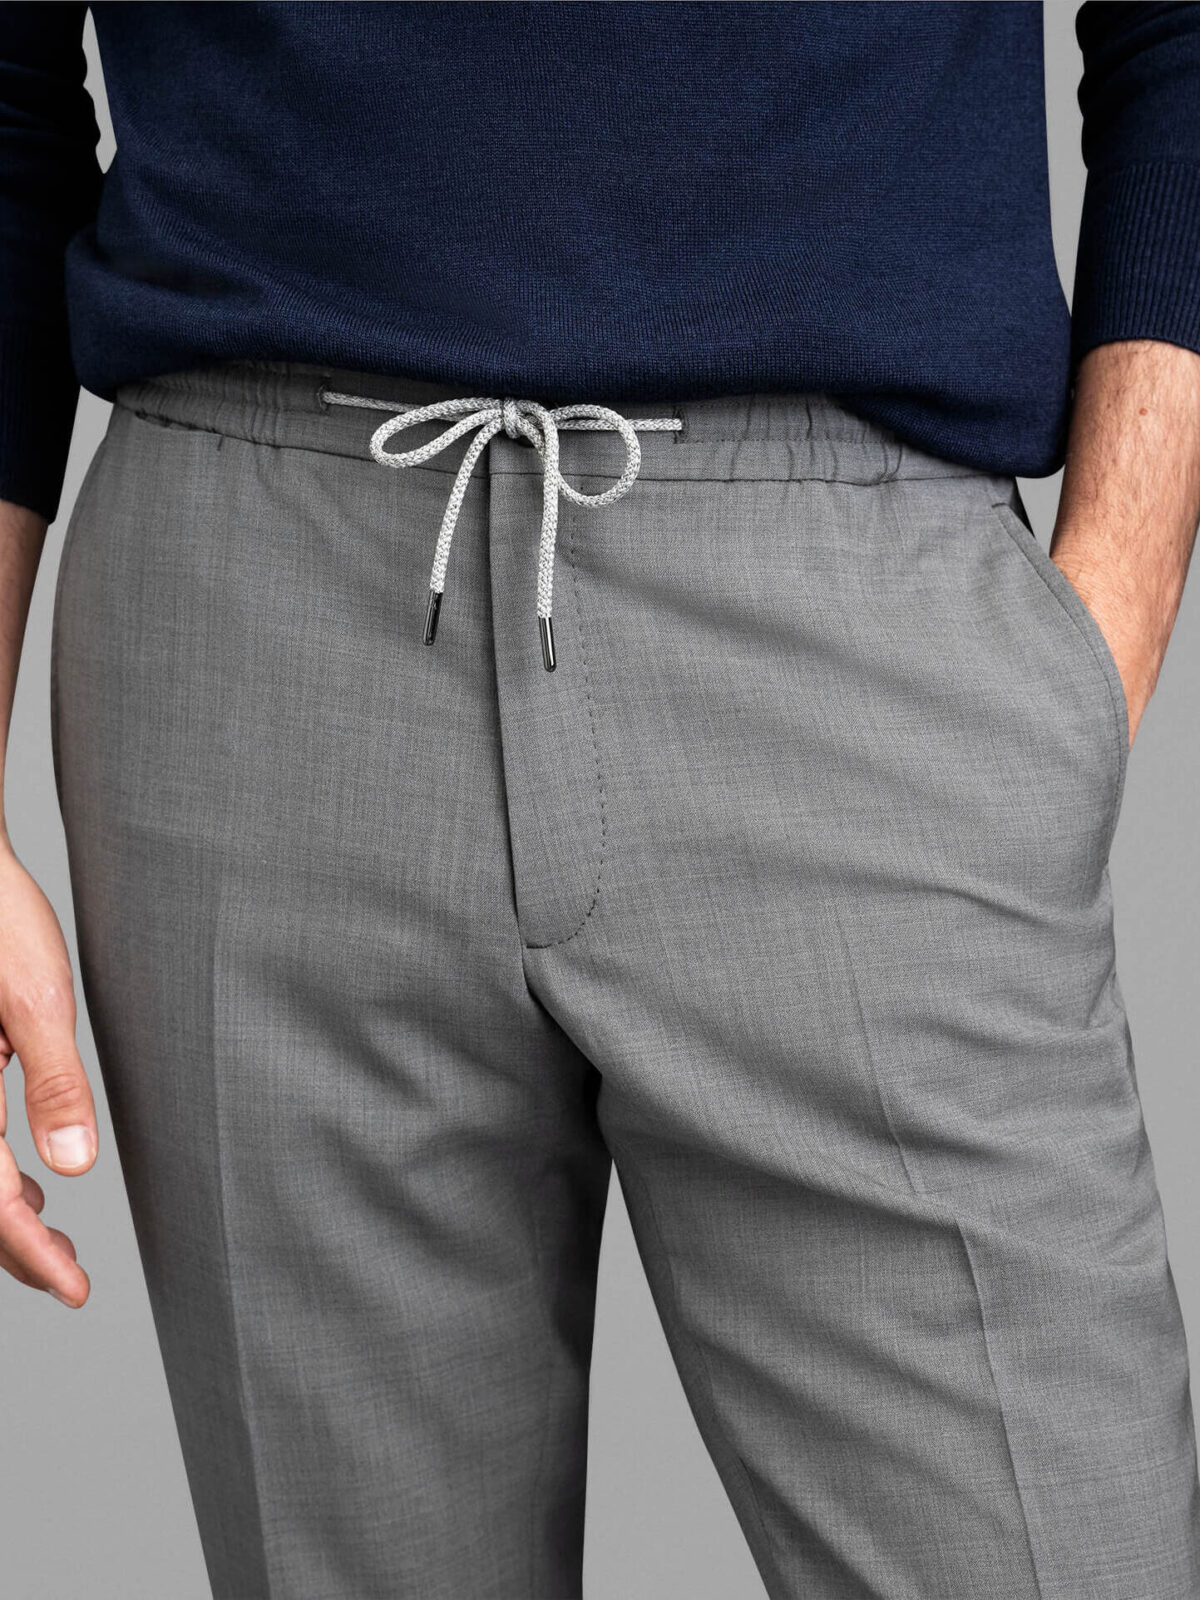 Light Grey Stretch Wool Jogger - Custom Fit Tailored Clothing